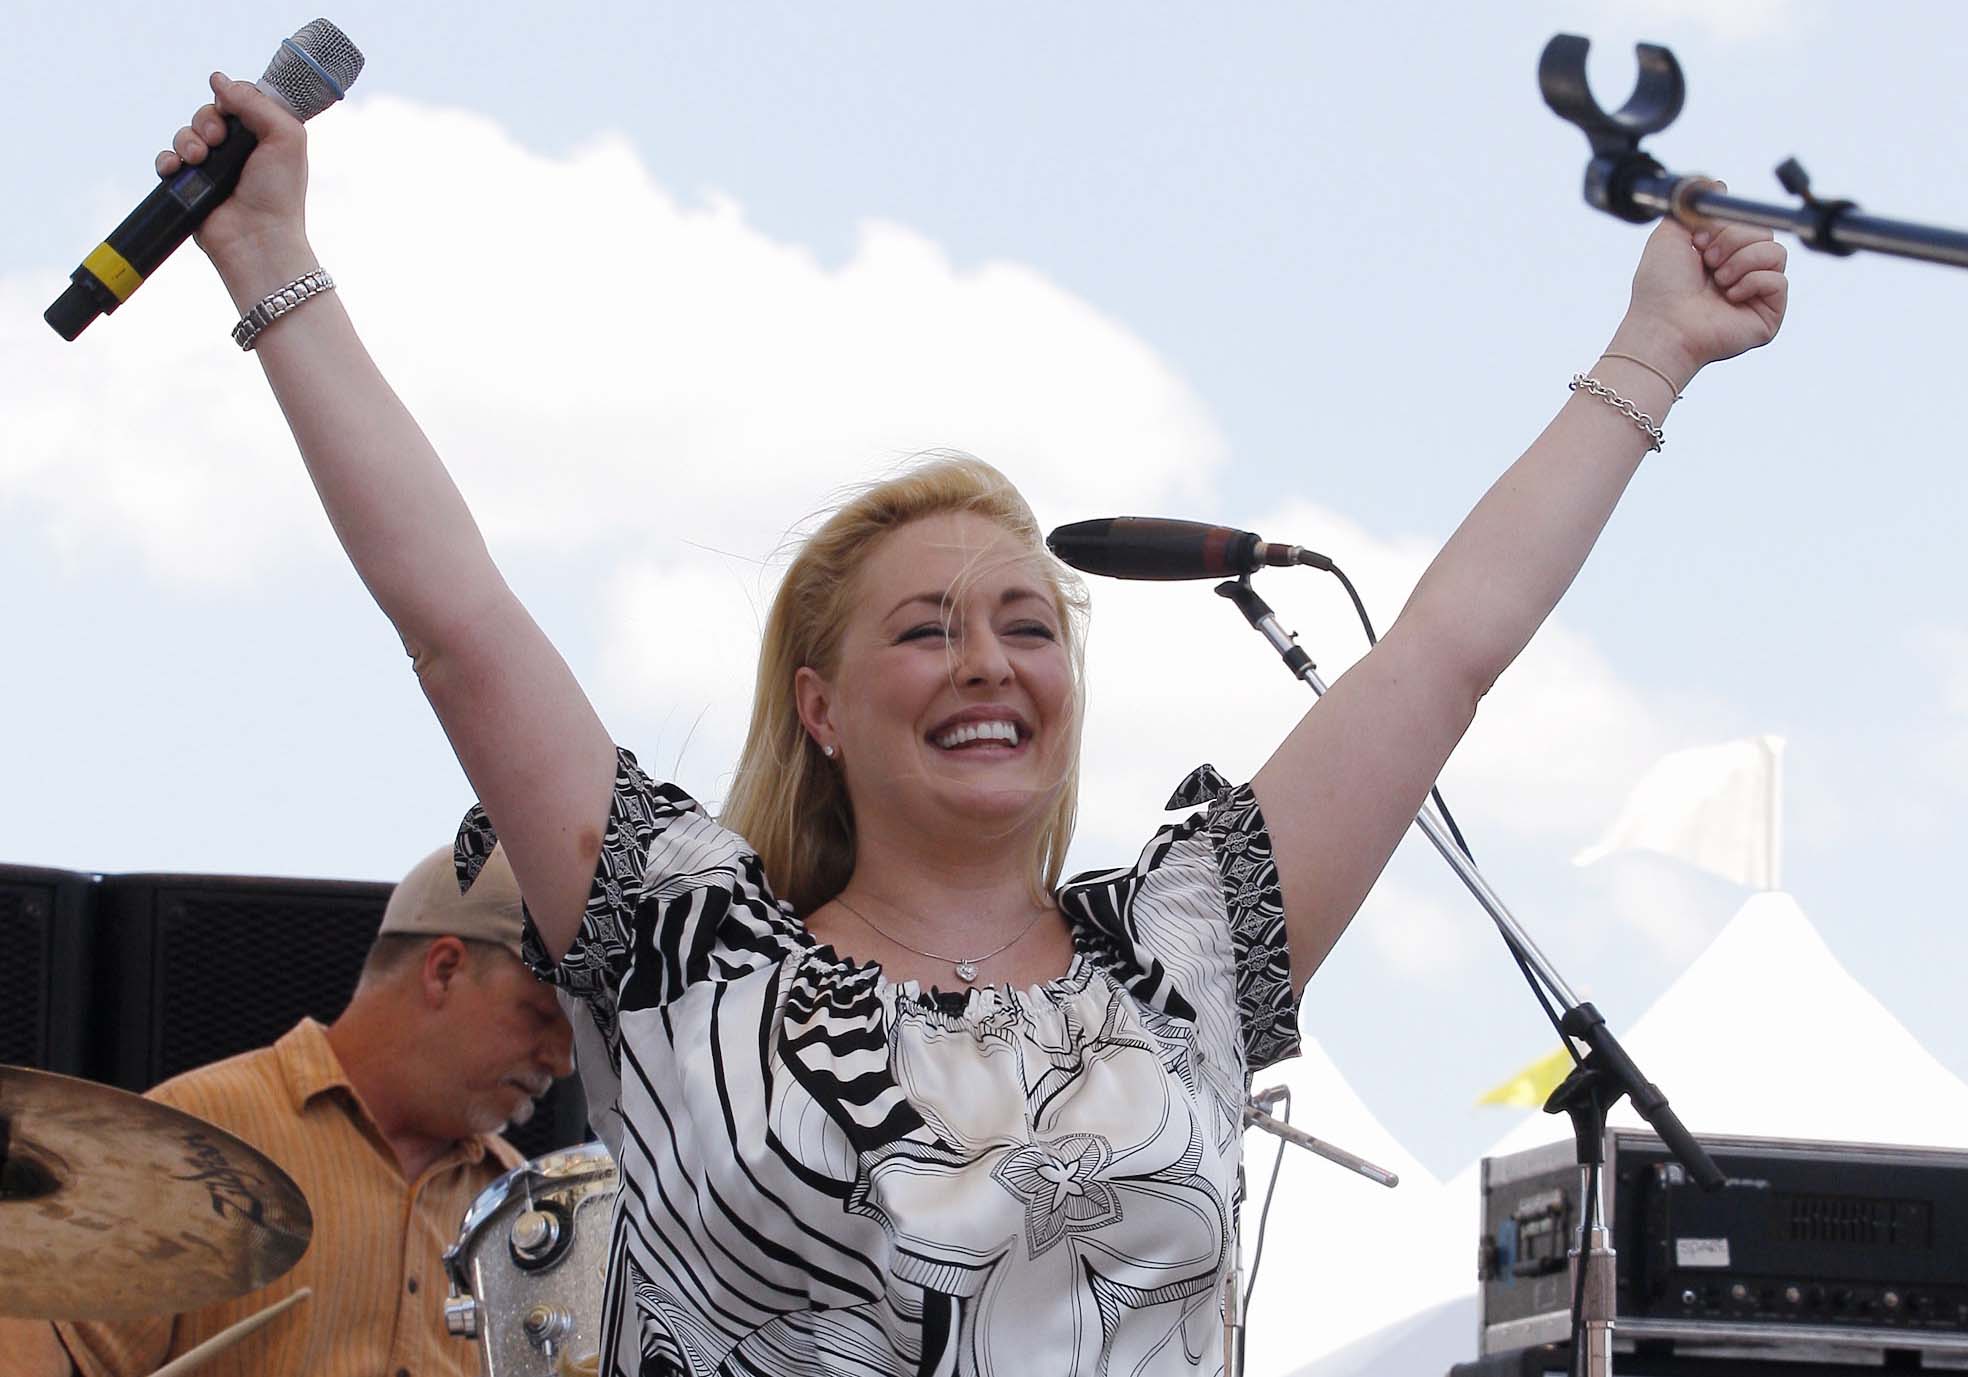 Country music artist Mindy McCready performs at the CMA Music Festival in Nashville, Tenn. on June 5, 2008. McCready, who hit the top of the country charts before personal problems sidetracked her career, died Sunday of an apparent self-inflicted gunshot wound.